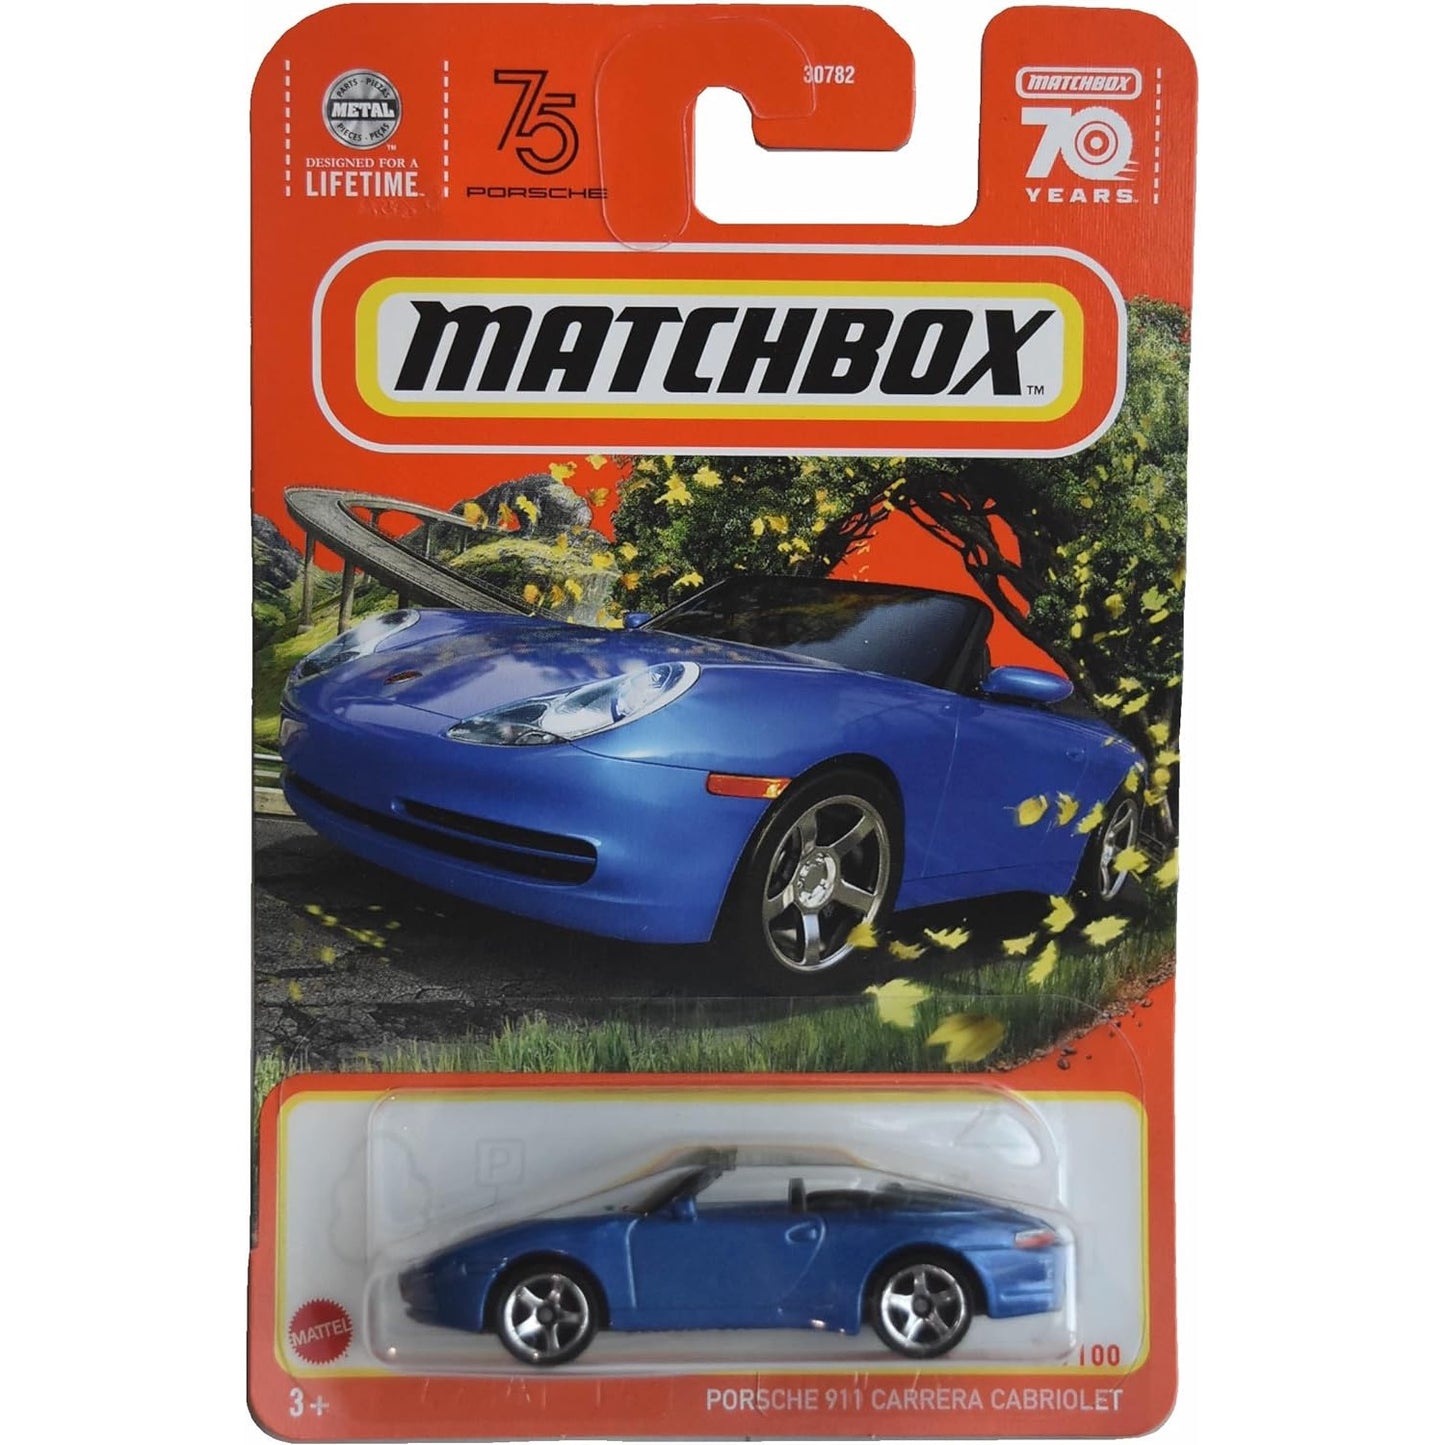 Matchbox - Porchse 911 Carrera Cabriolet Boxed Preowned